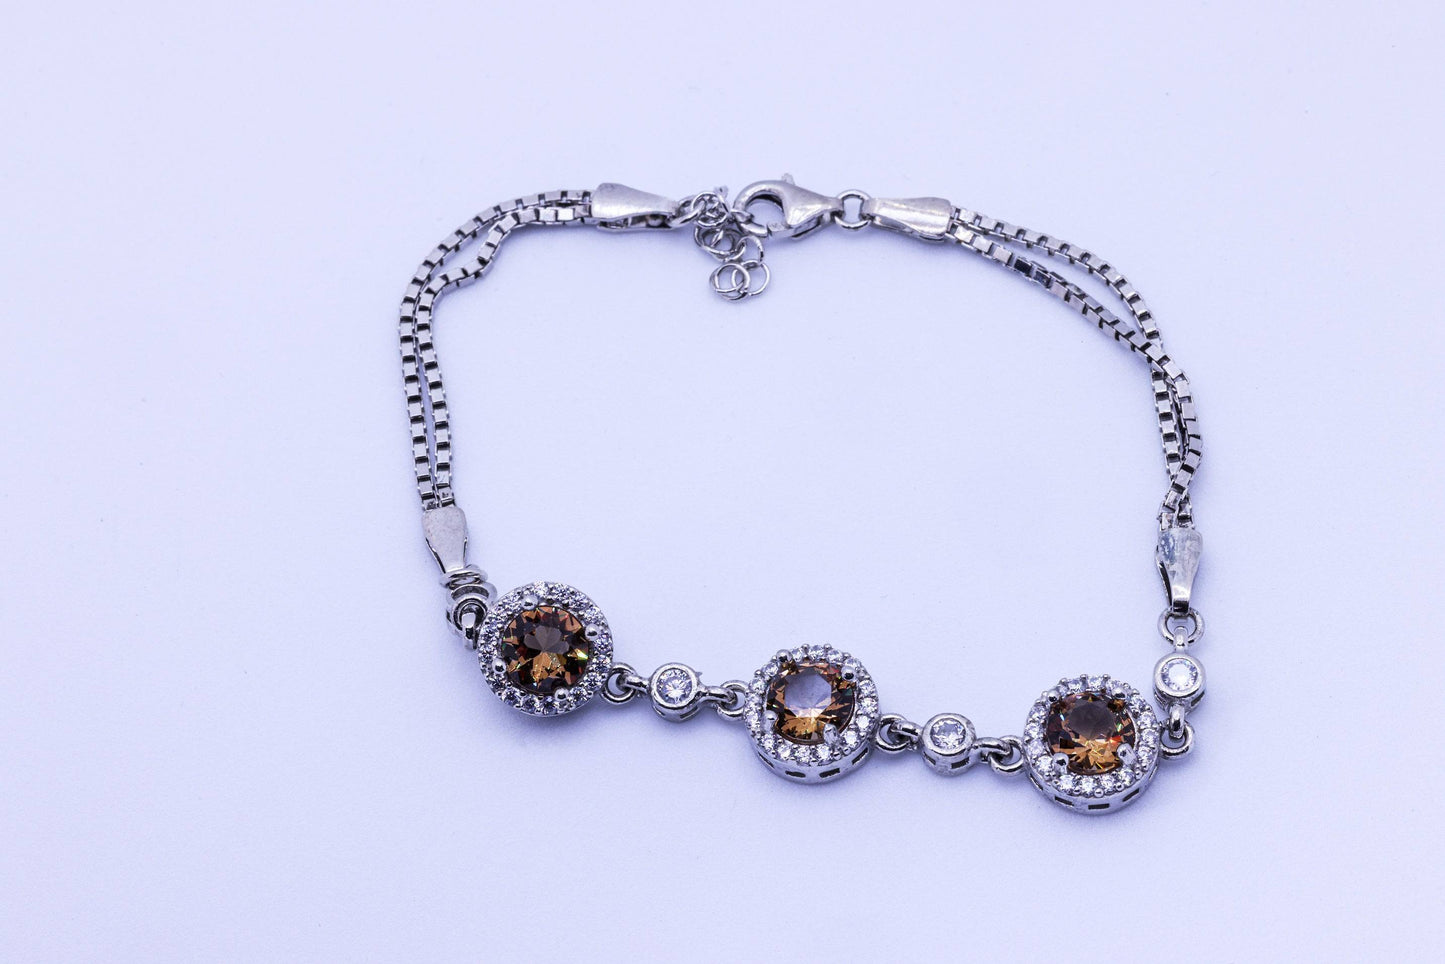 Elegant Sterling Silver Brown Stone Bracelet - Timeless Beauty and Natural Charm | 6.5g, 20cm